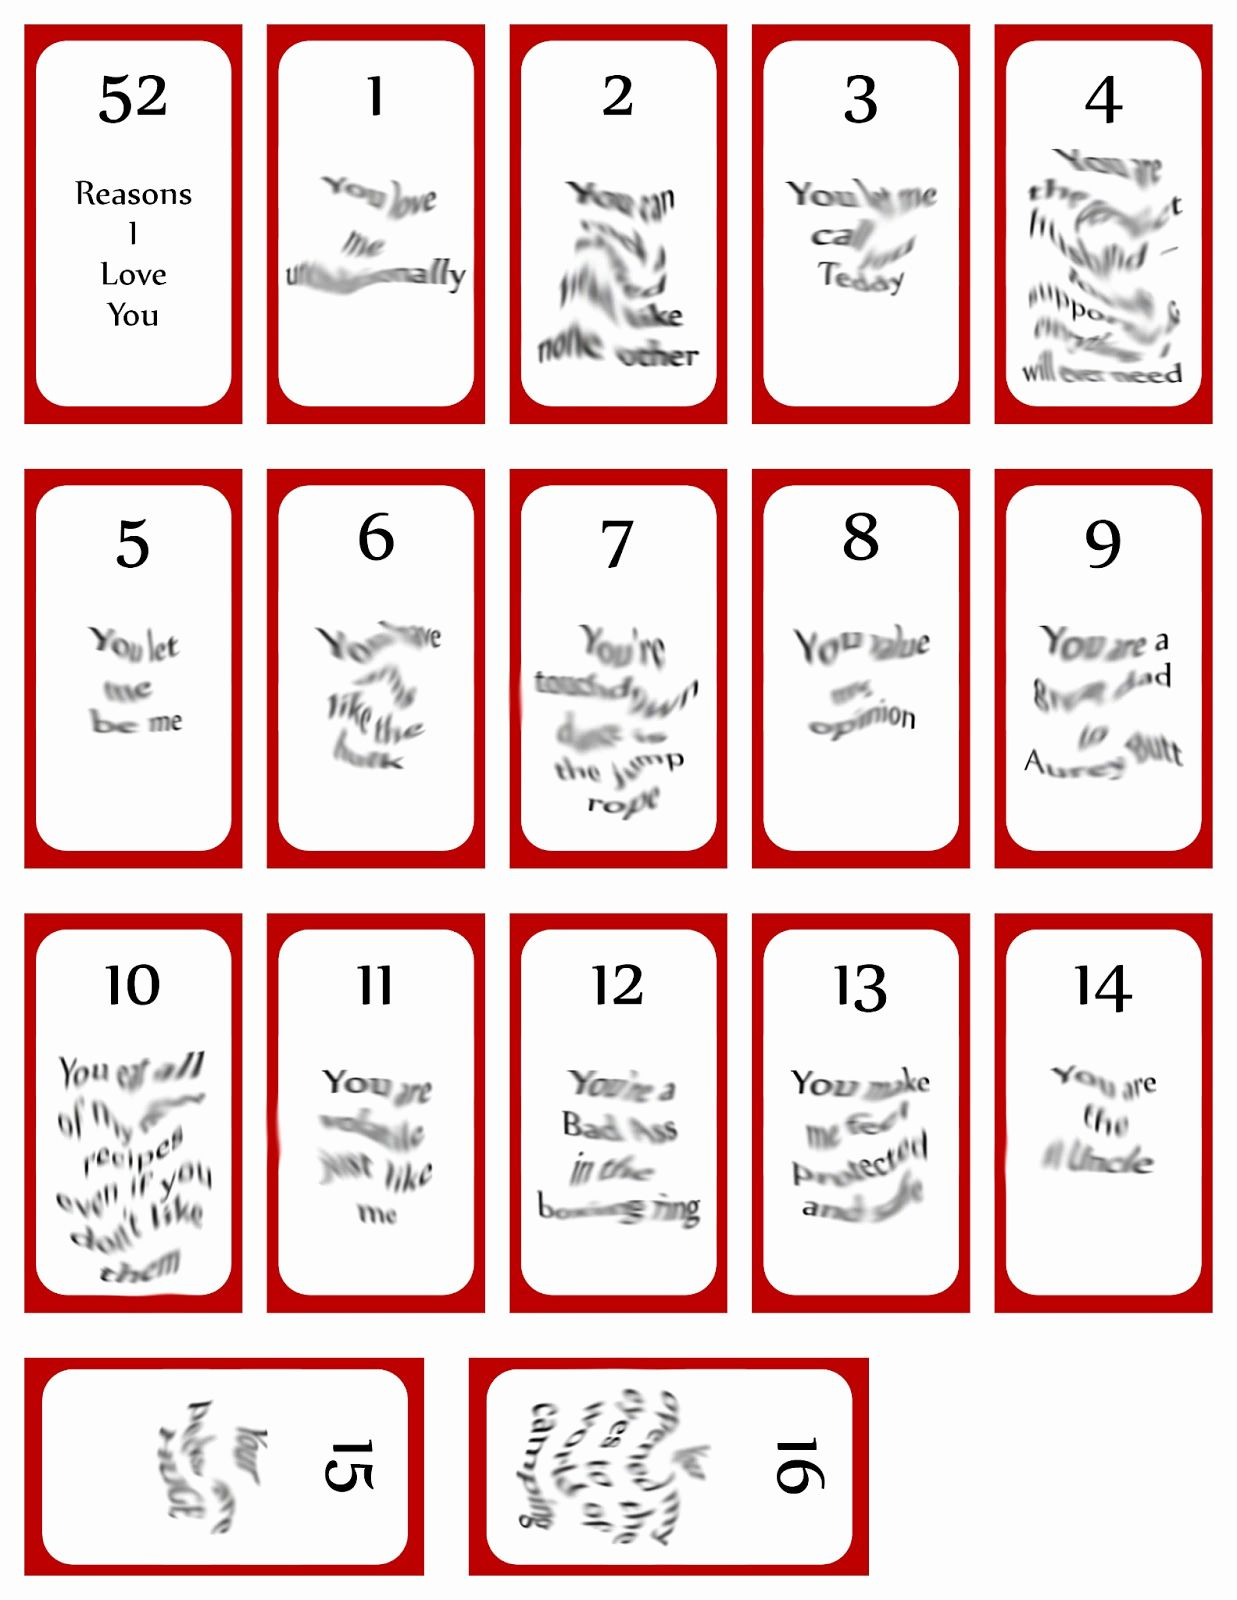 The Stunning 52 Reasons Why I Love You Cards Printable Templates Free 